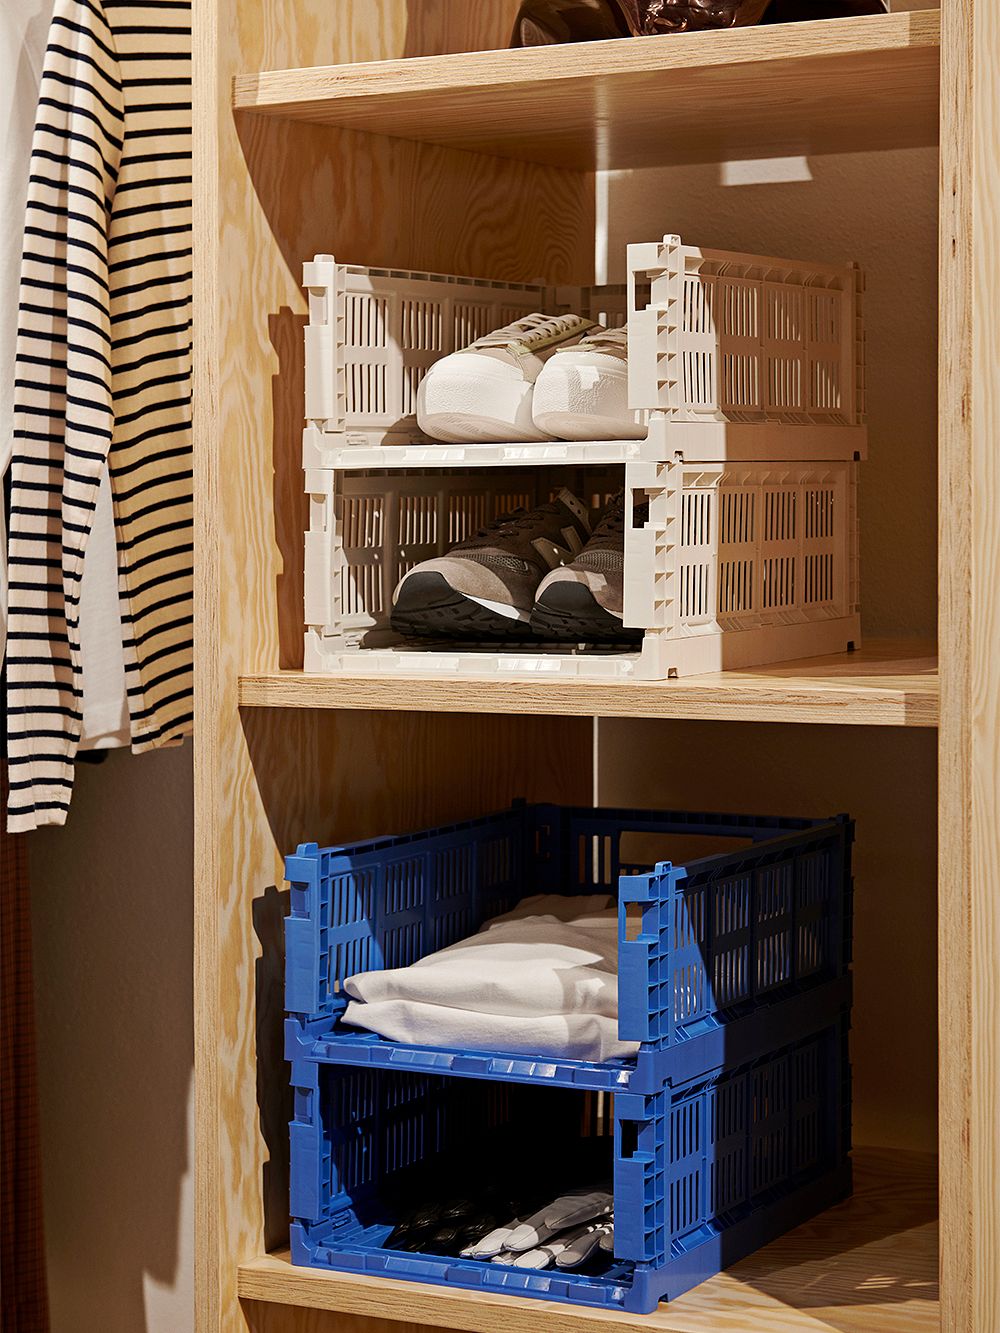 An image of HAY's Colour Crates in a cupboard, as part of the hallway or walk-in closet decor.